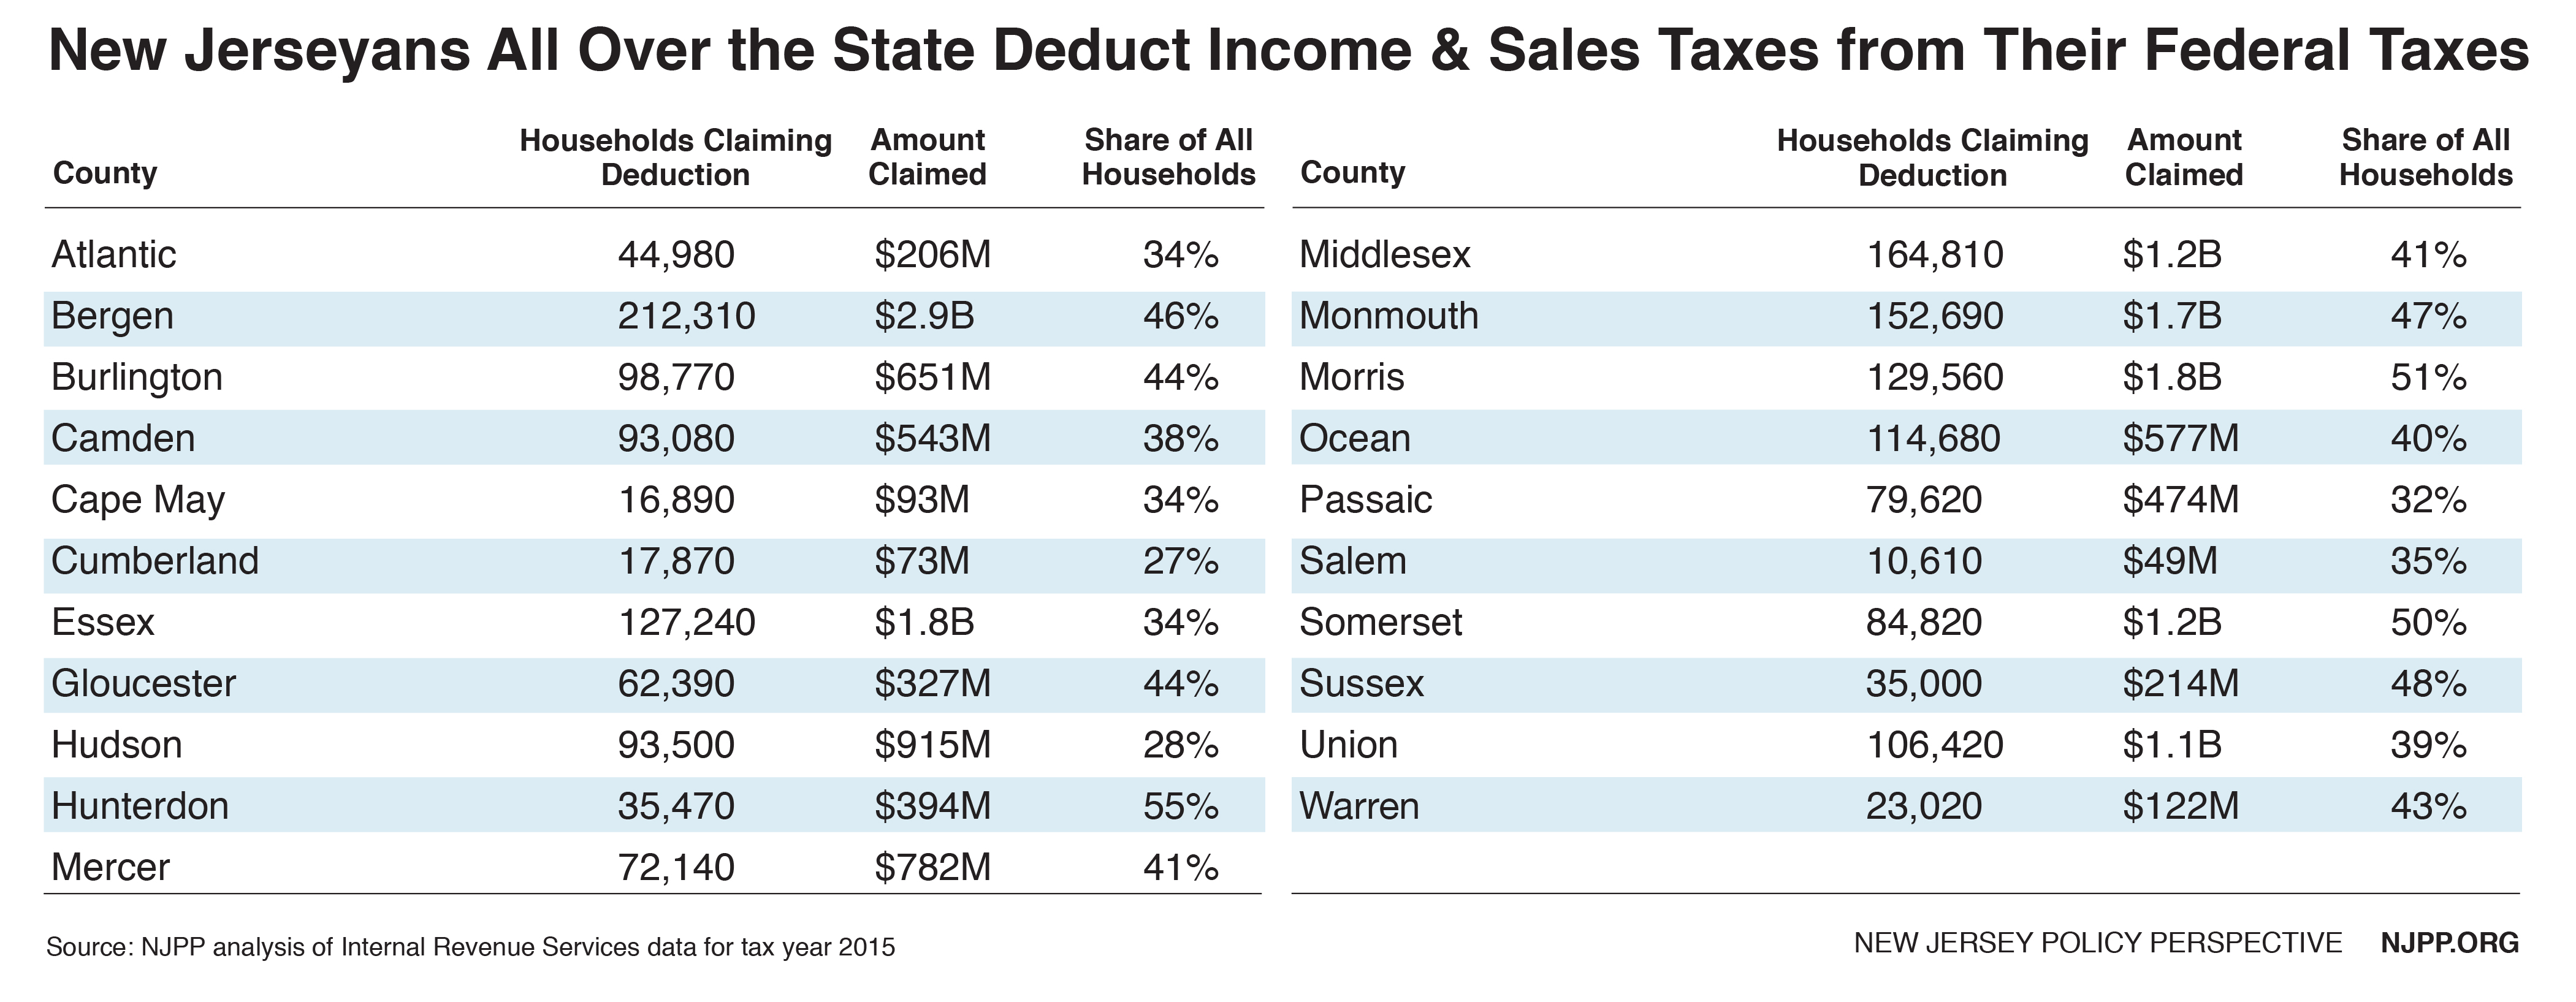 millions-of-new-jerseyans-deduct-billions-in-state-and-local-taxes-each